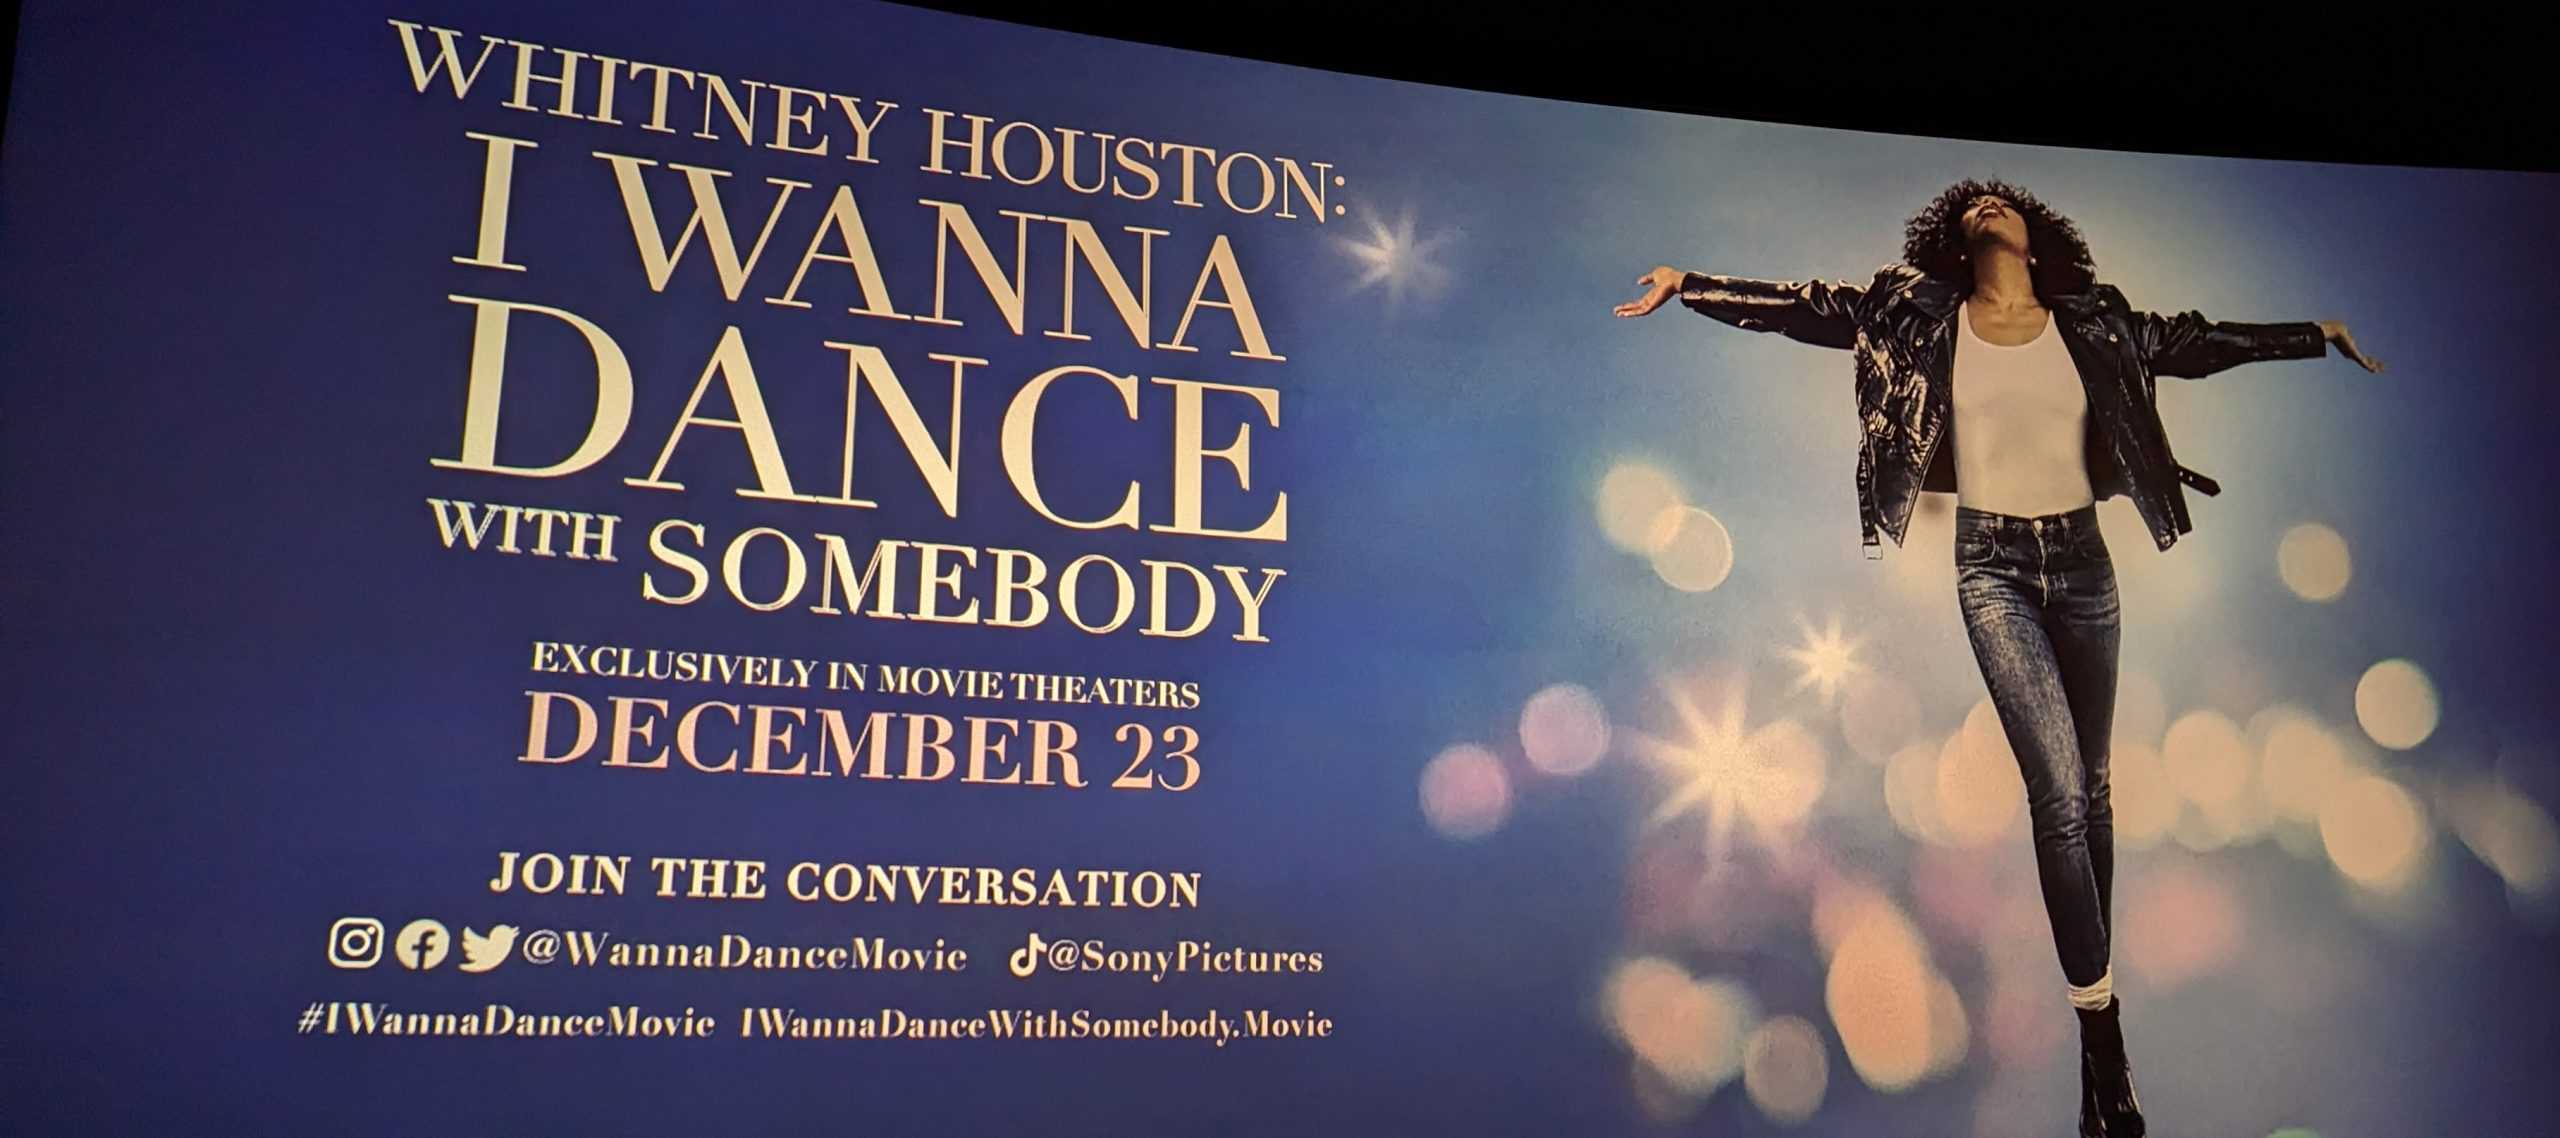 Theatrical Advertisement for Whitney Houston: I Wanna Dance With Somebody